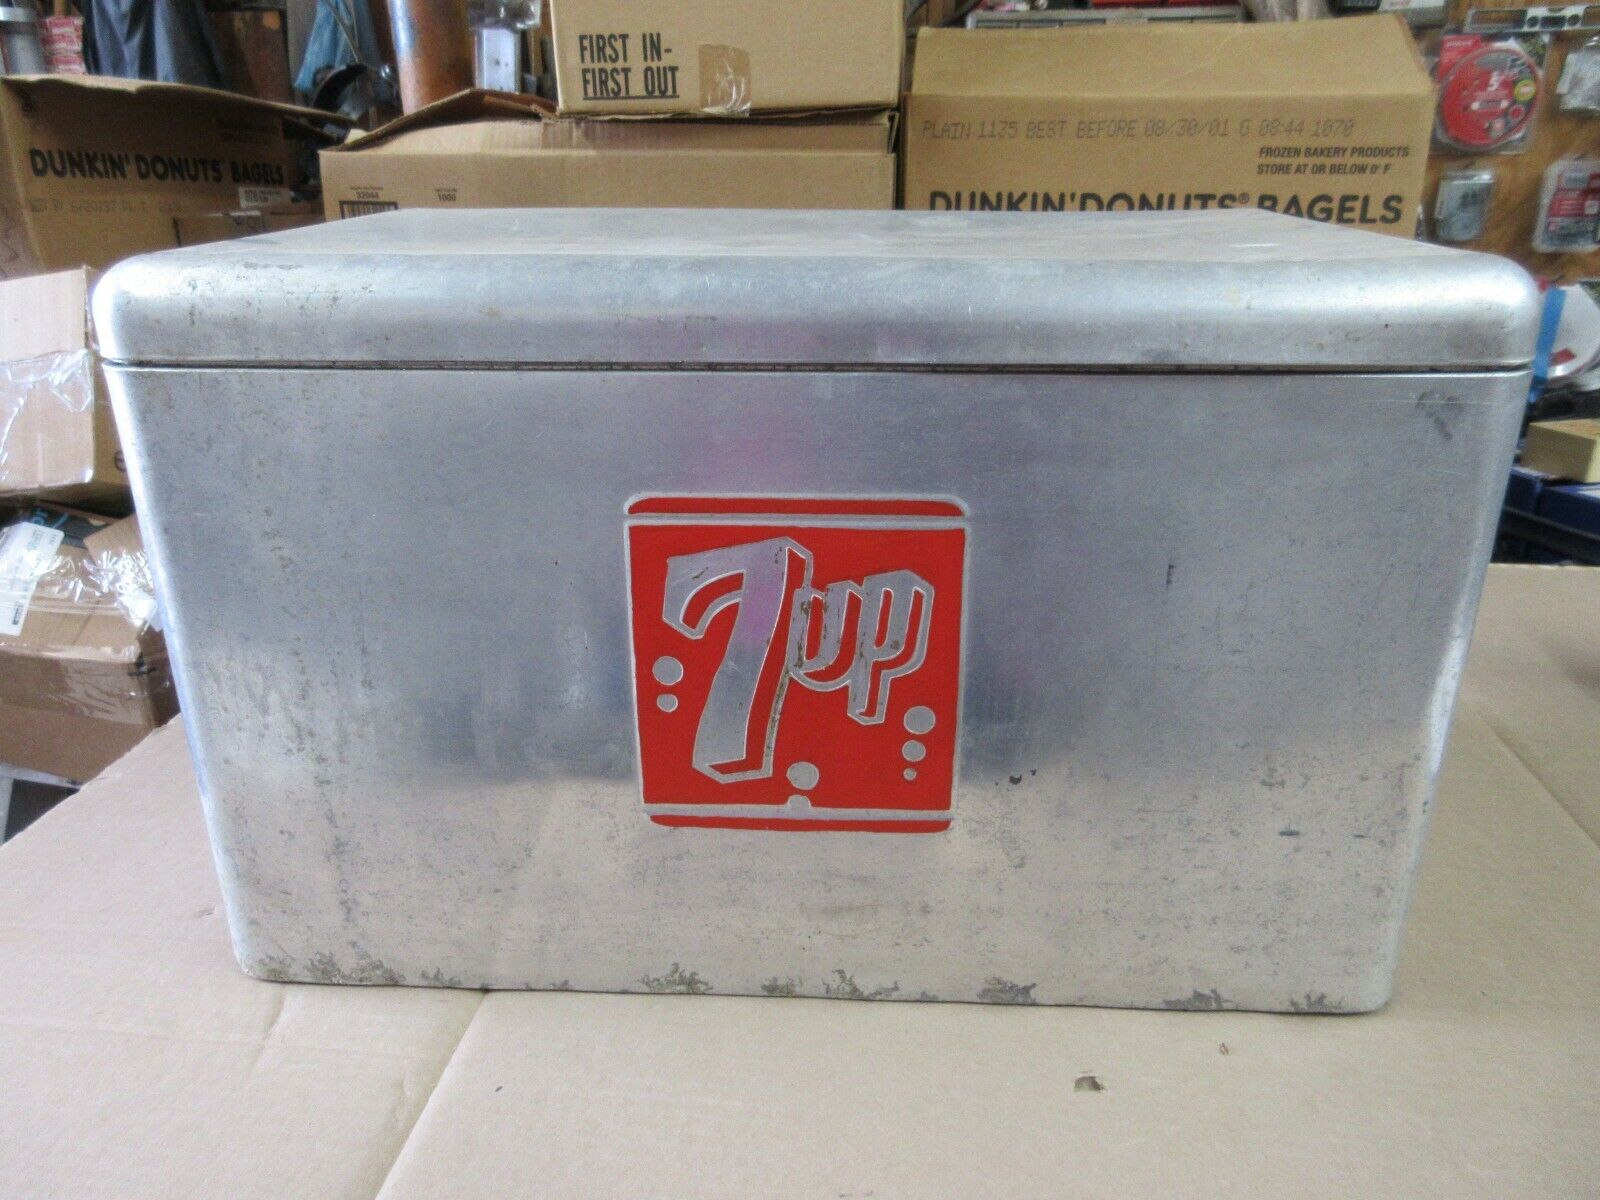 Vintage 7Up Cooler Aluminum With Tray and Drain